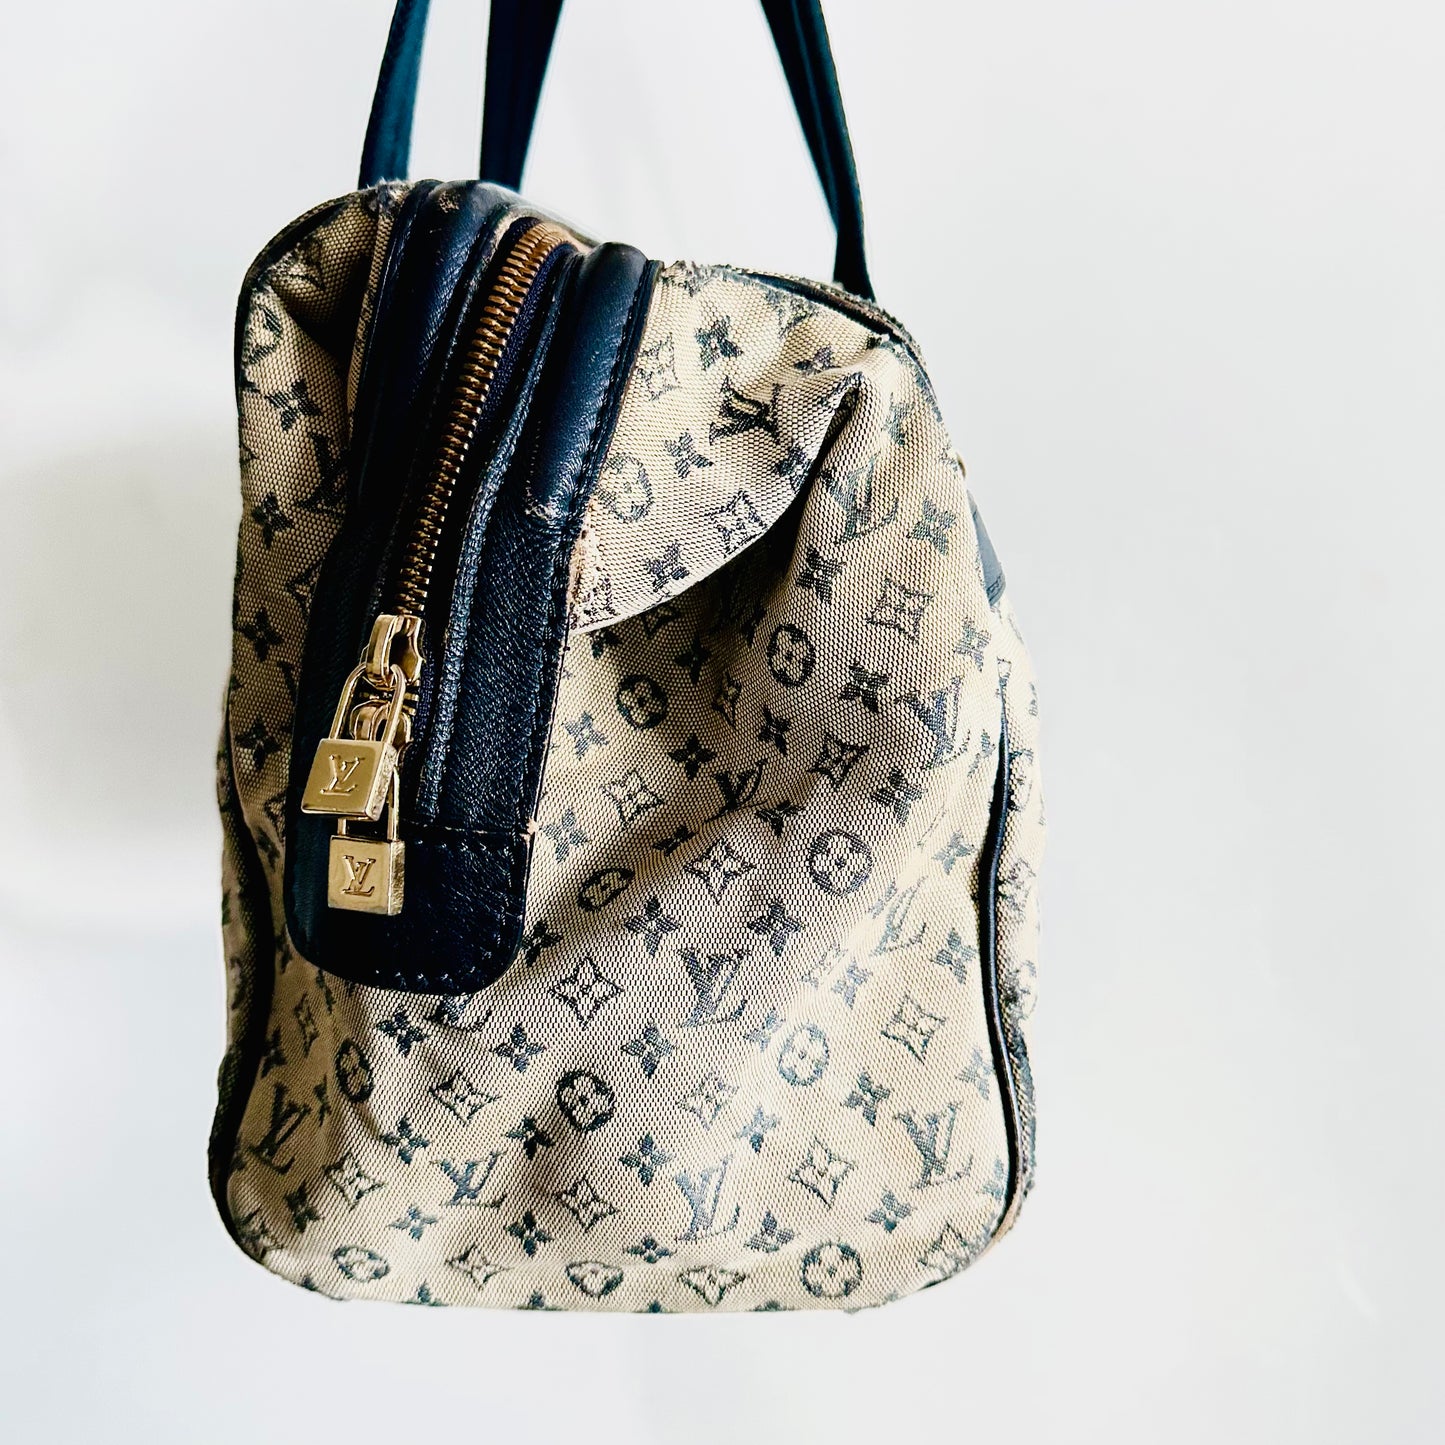 Louis Vuitton M41739 ポルトフォイユ・ジョセフィーヌ for $275 for